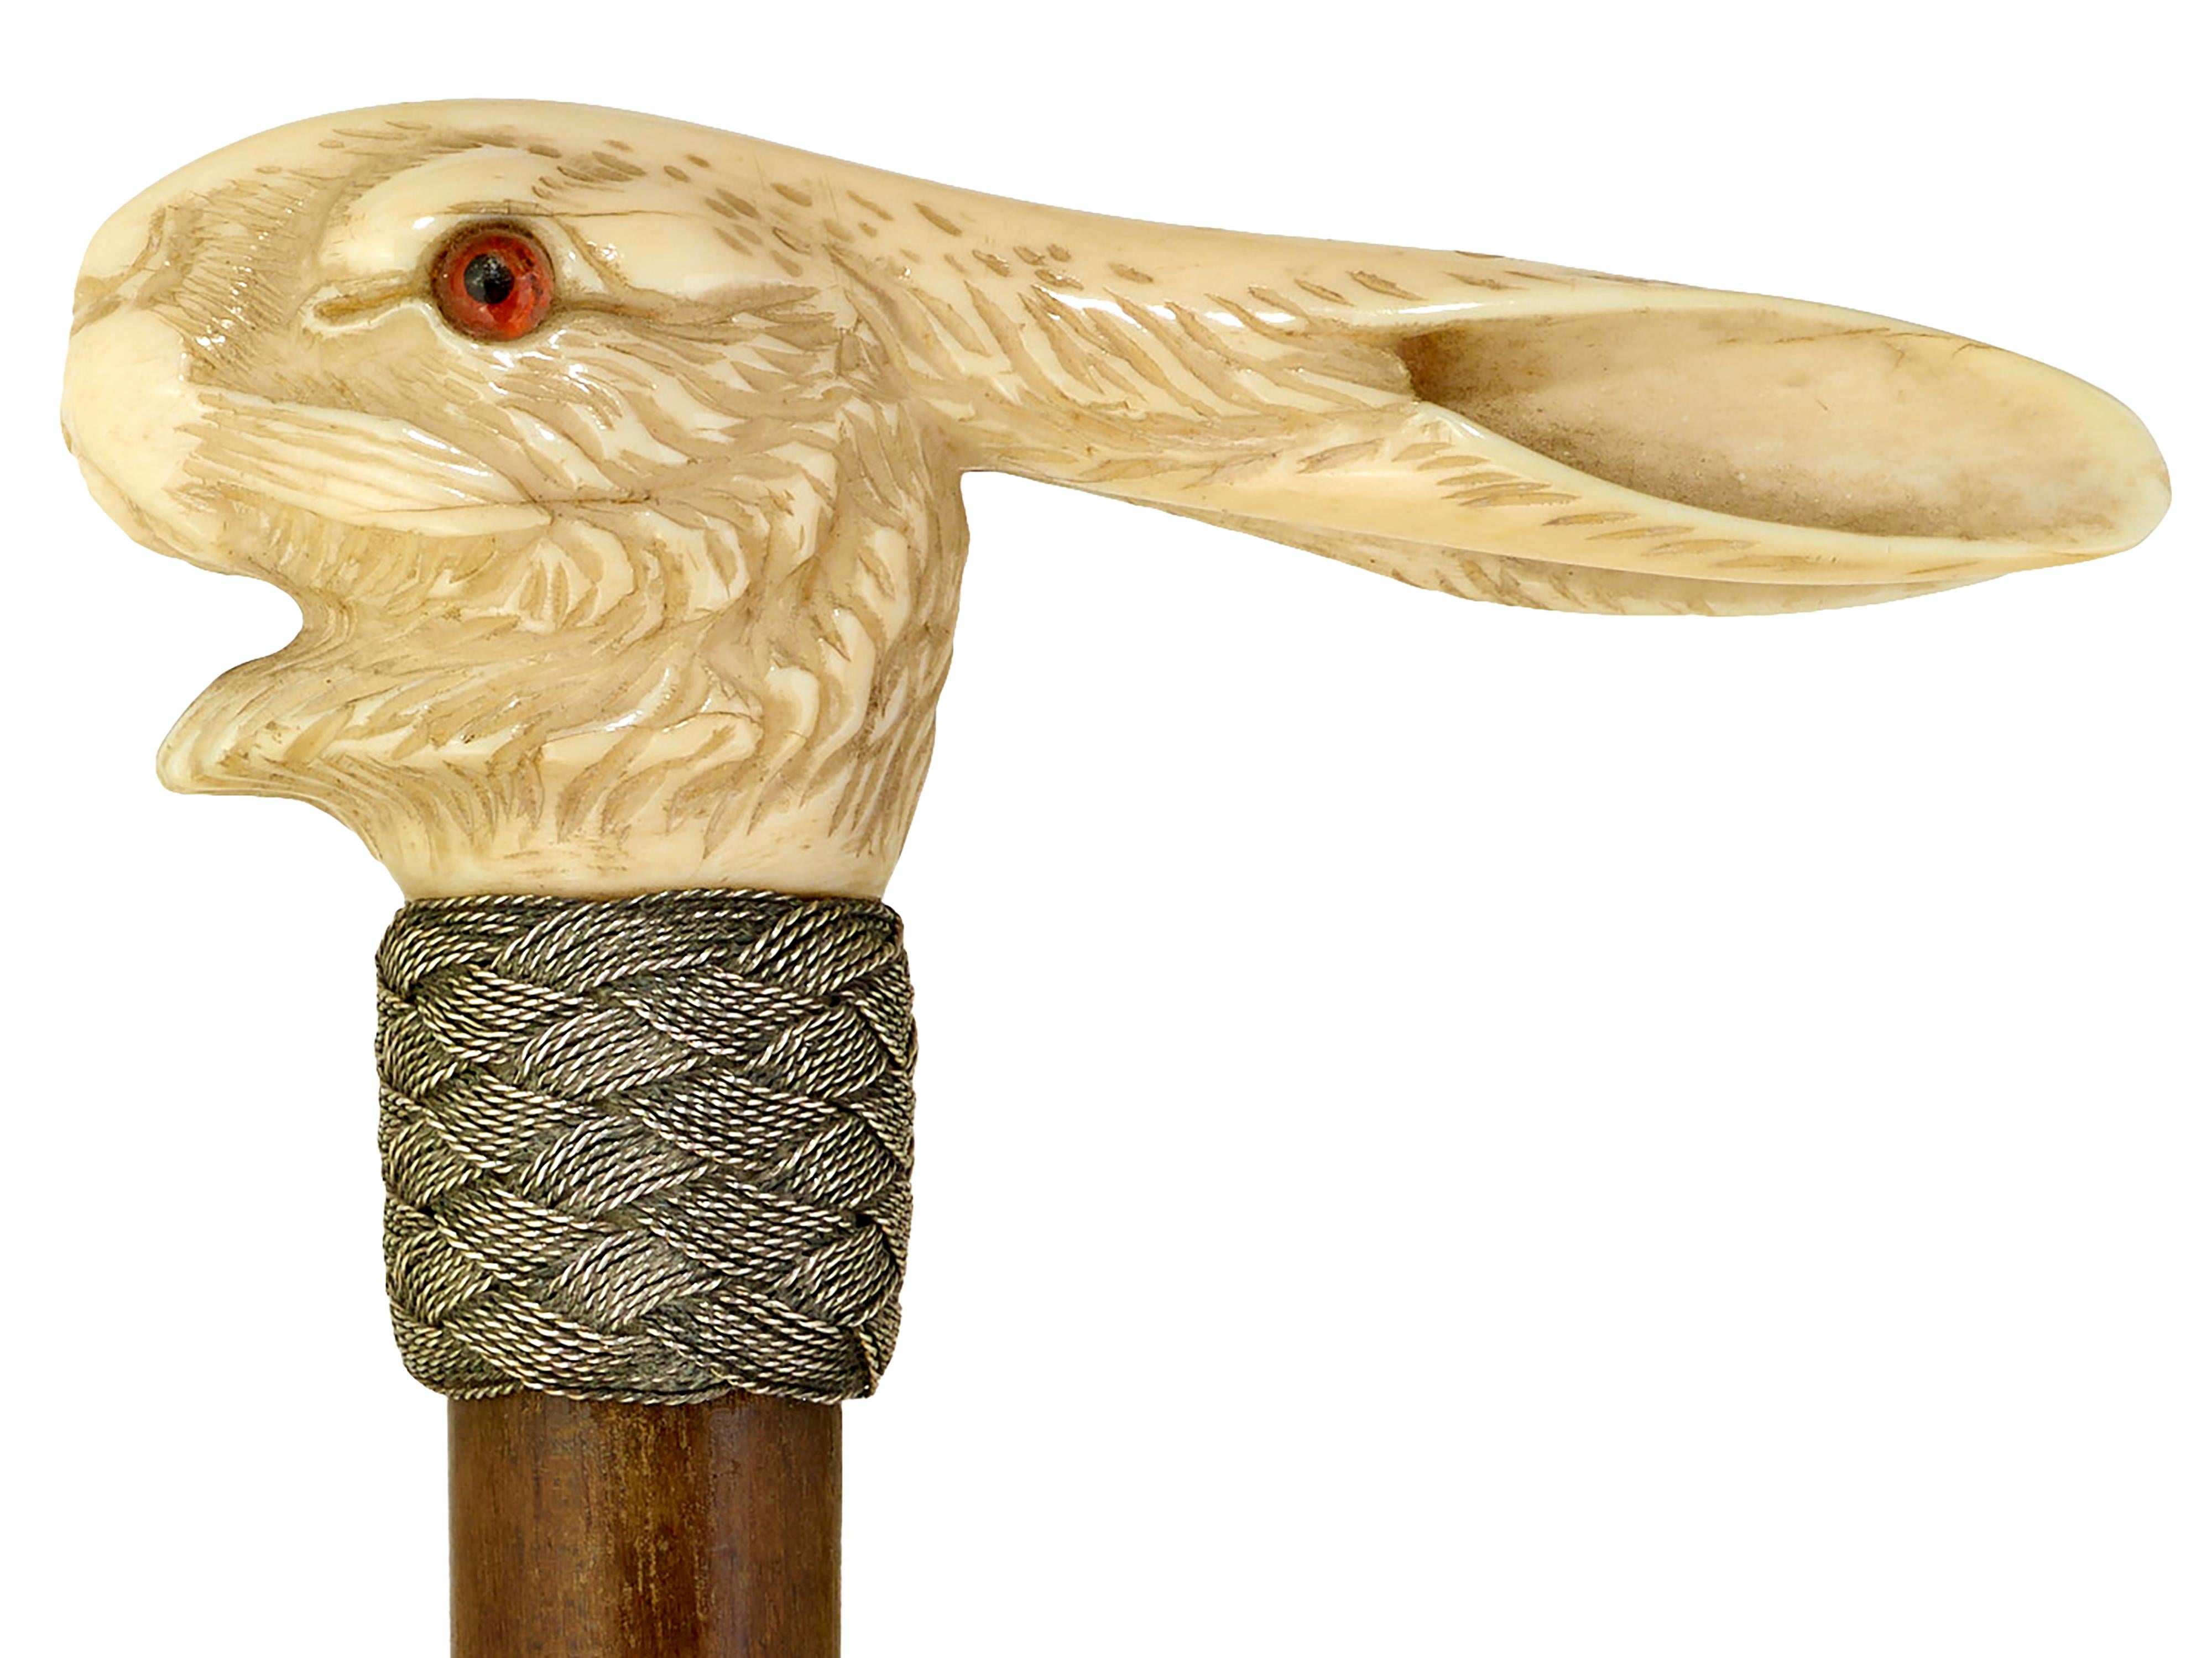 Walking cane with carved hare
Well carved hare with vivid red glass eyes. Plaited silver collar. Snakewood shaft and original ferrule. Excellent condition. 
Will be supplied with Ivory Submission Reference No.